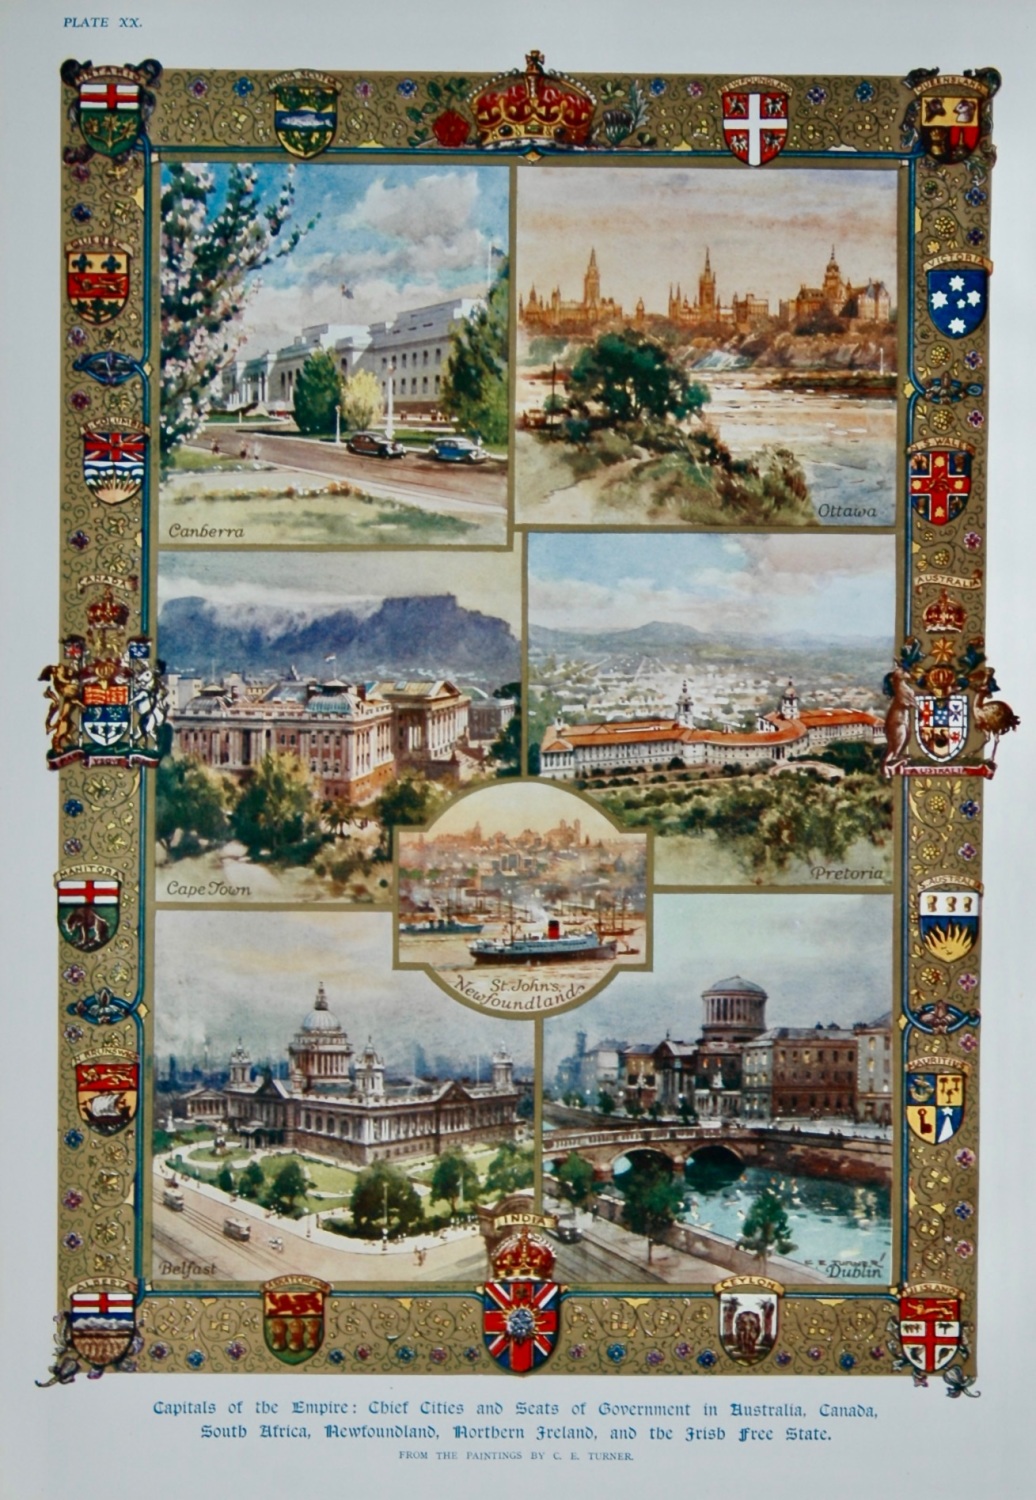 Capitals of the Empire : Chief Cities and Seats of Government in Australia,